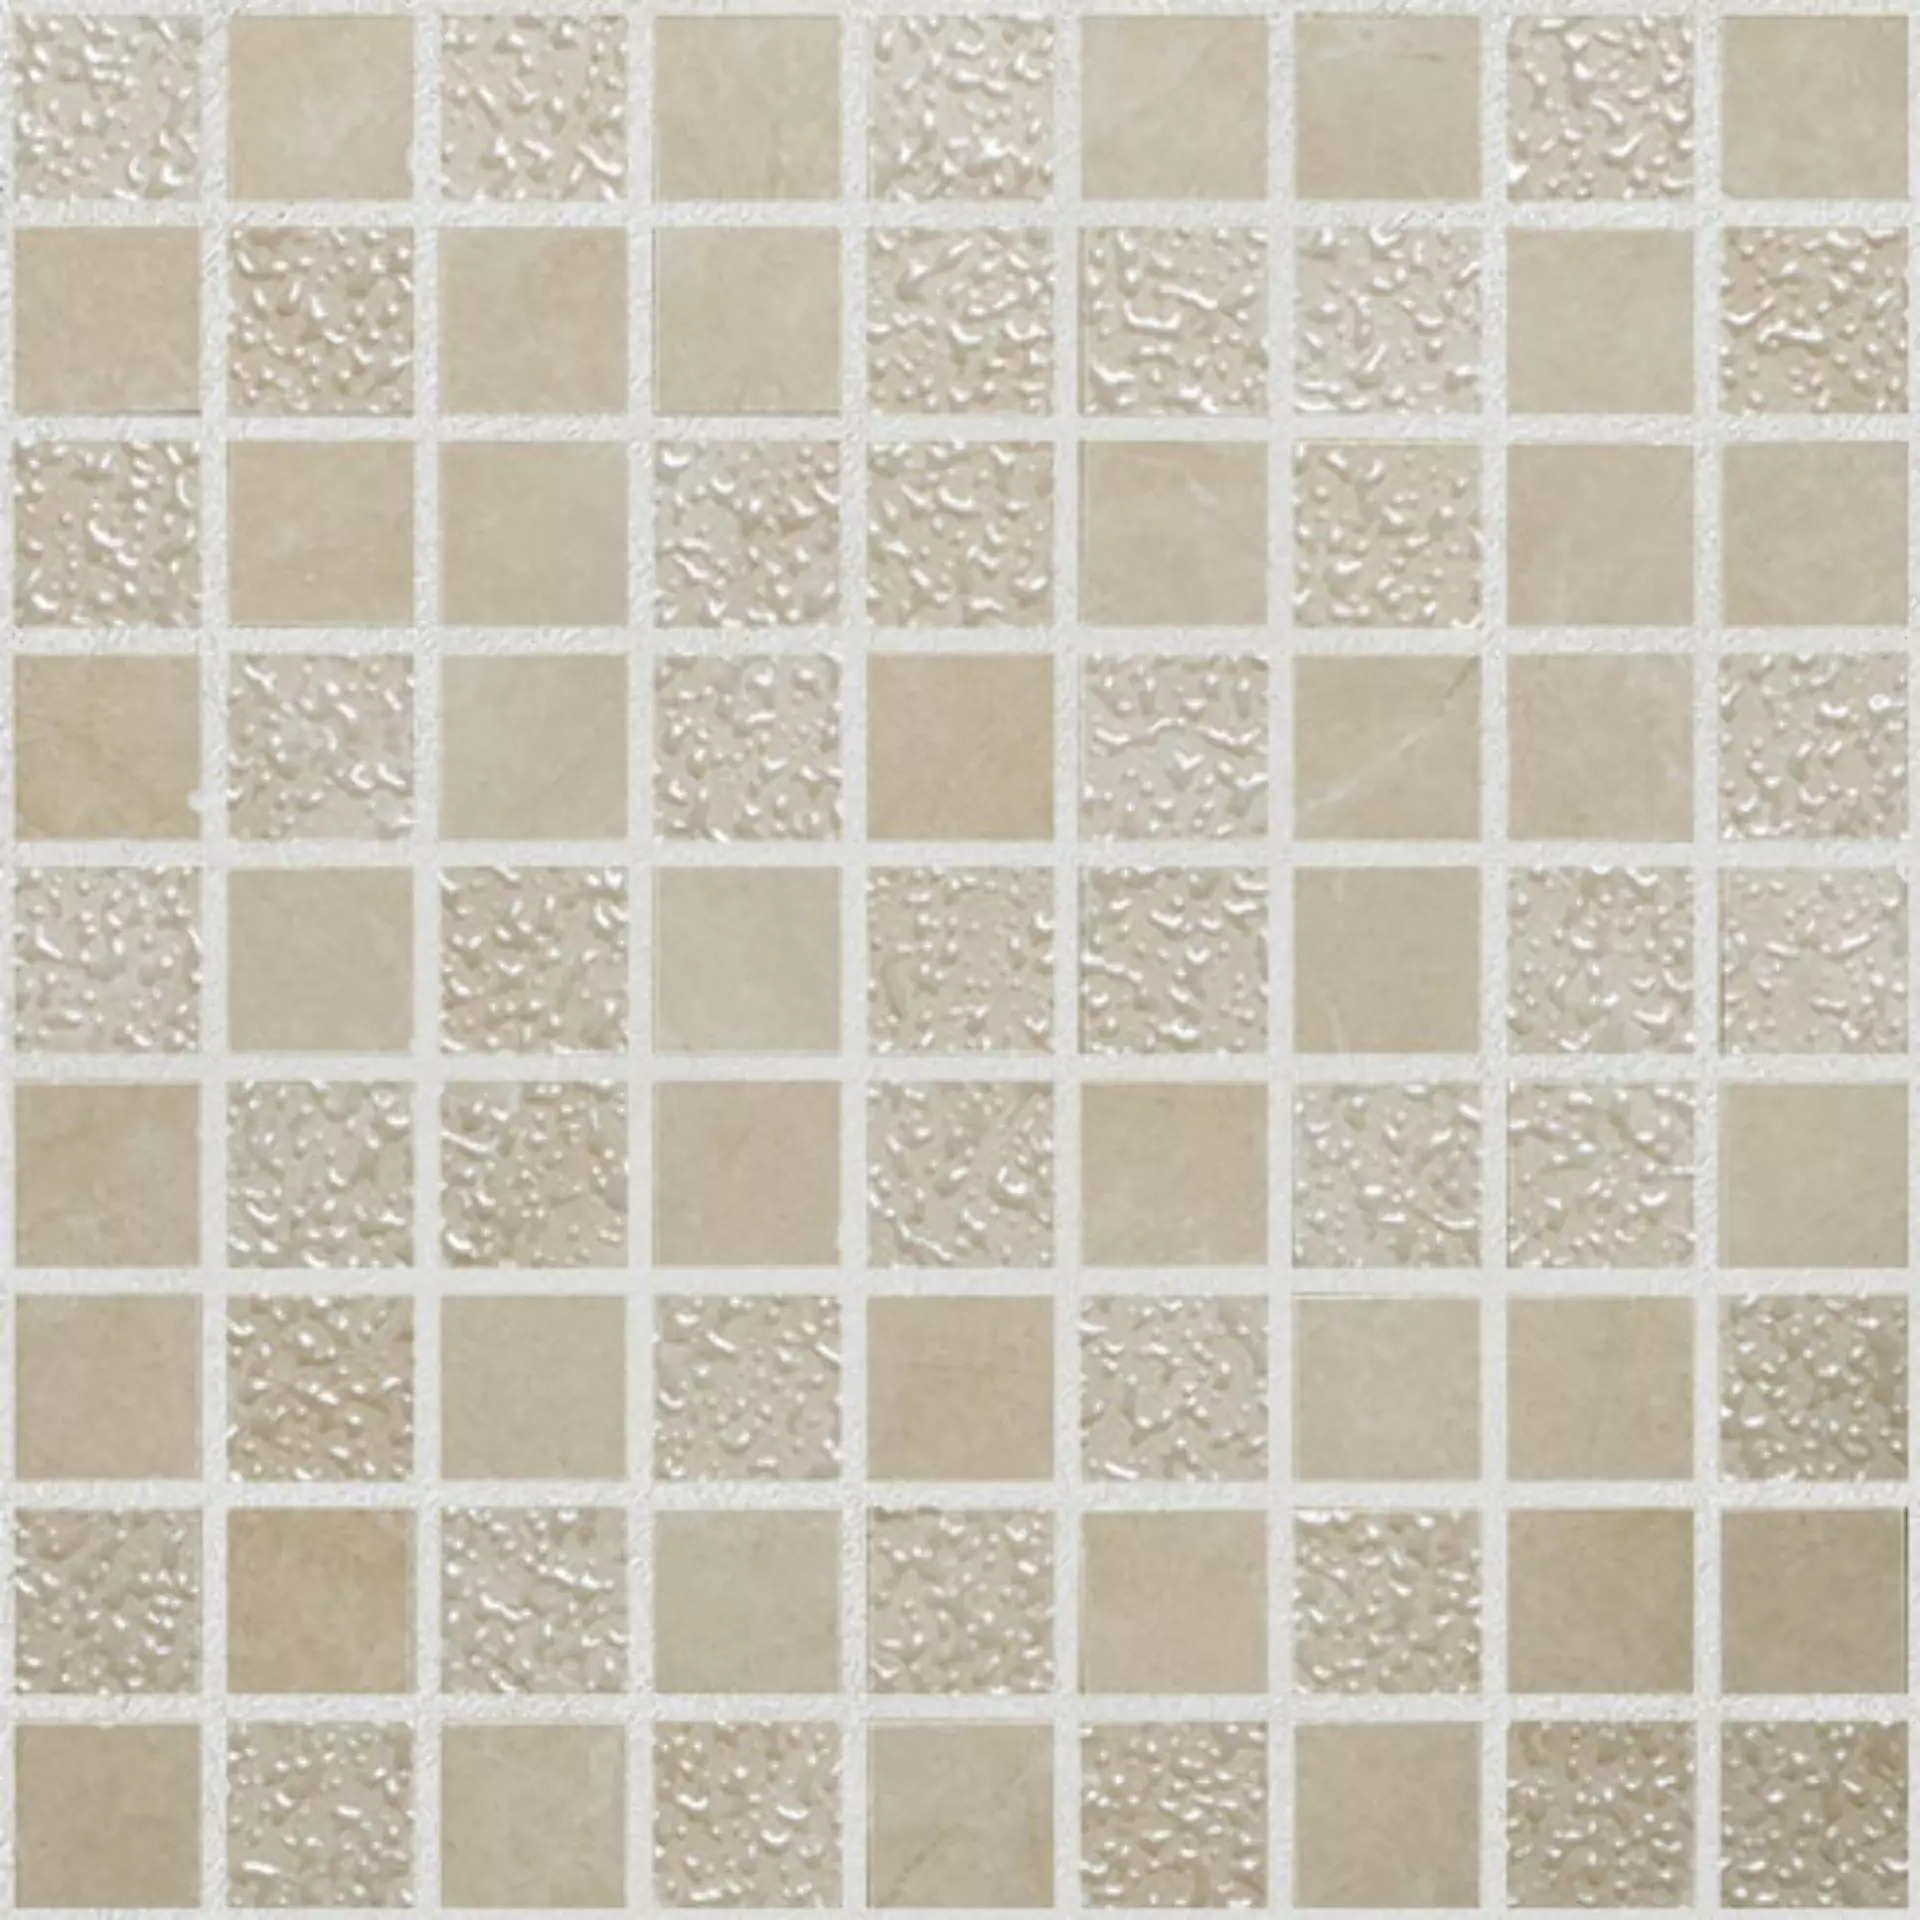 MGM Lux Gold Lux Gold LUXGOLMOSGLO glaenzend 25x25cm Mosaik Glossy 9mm